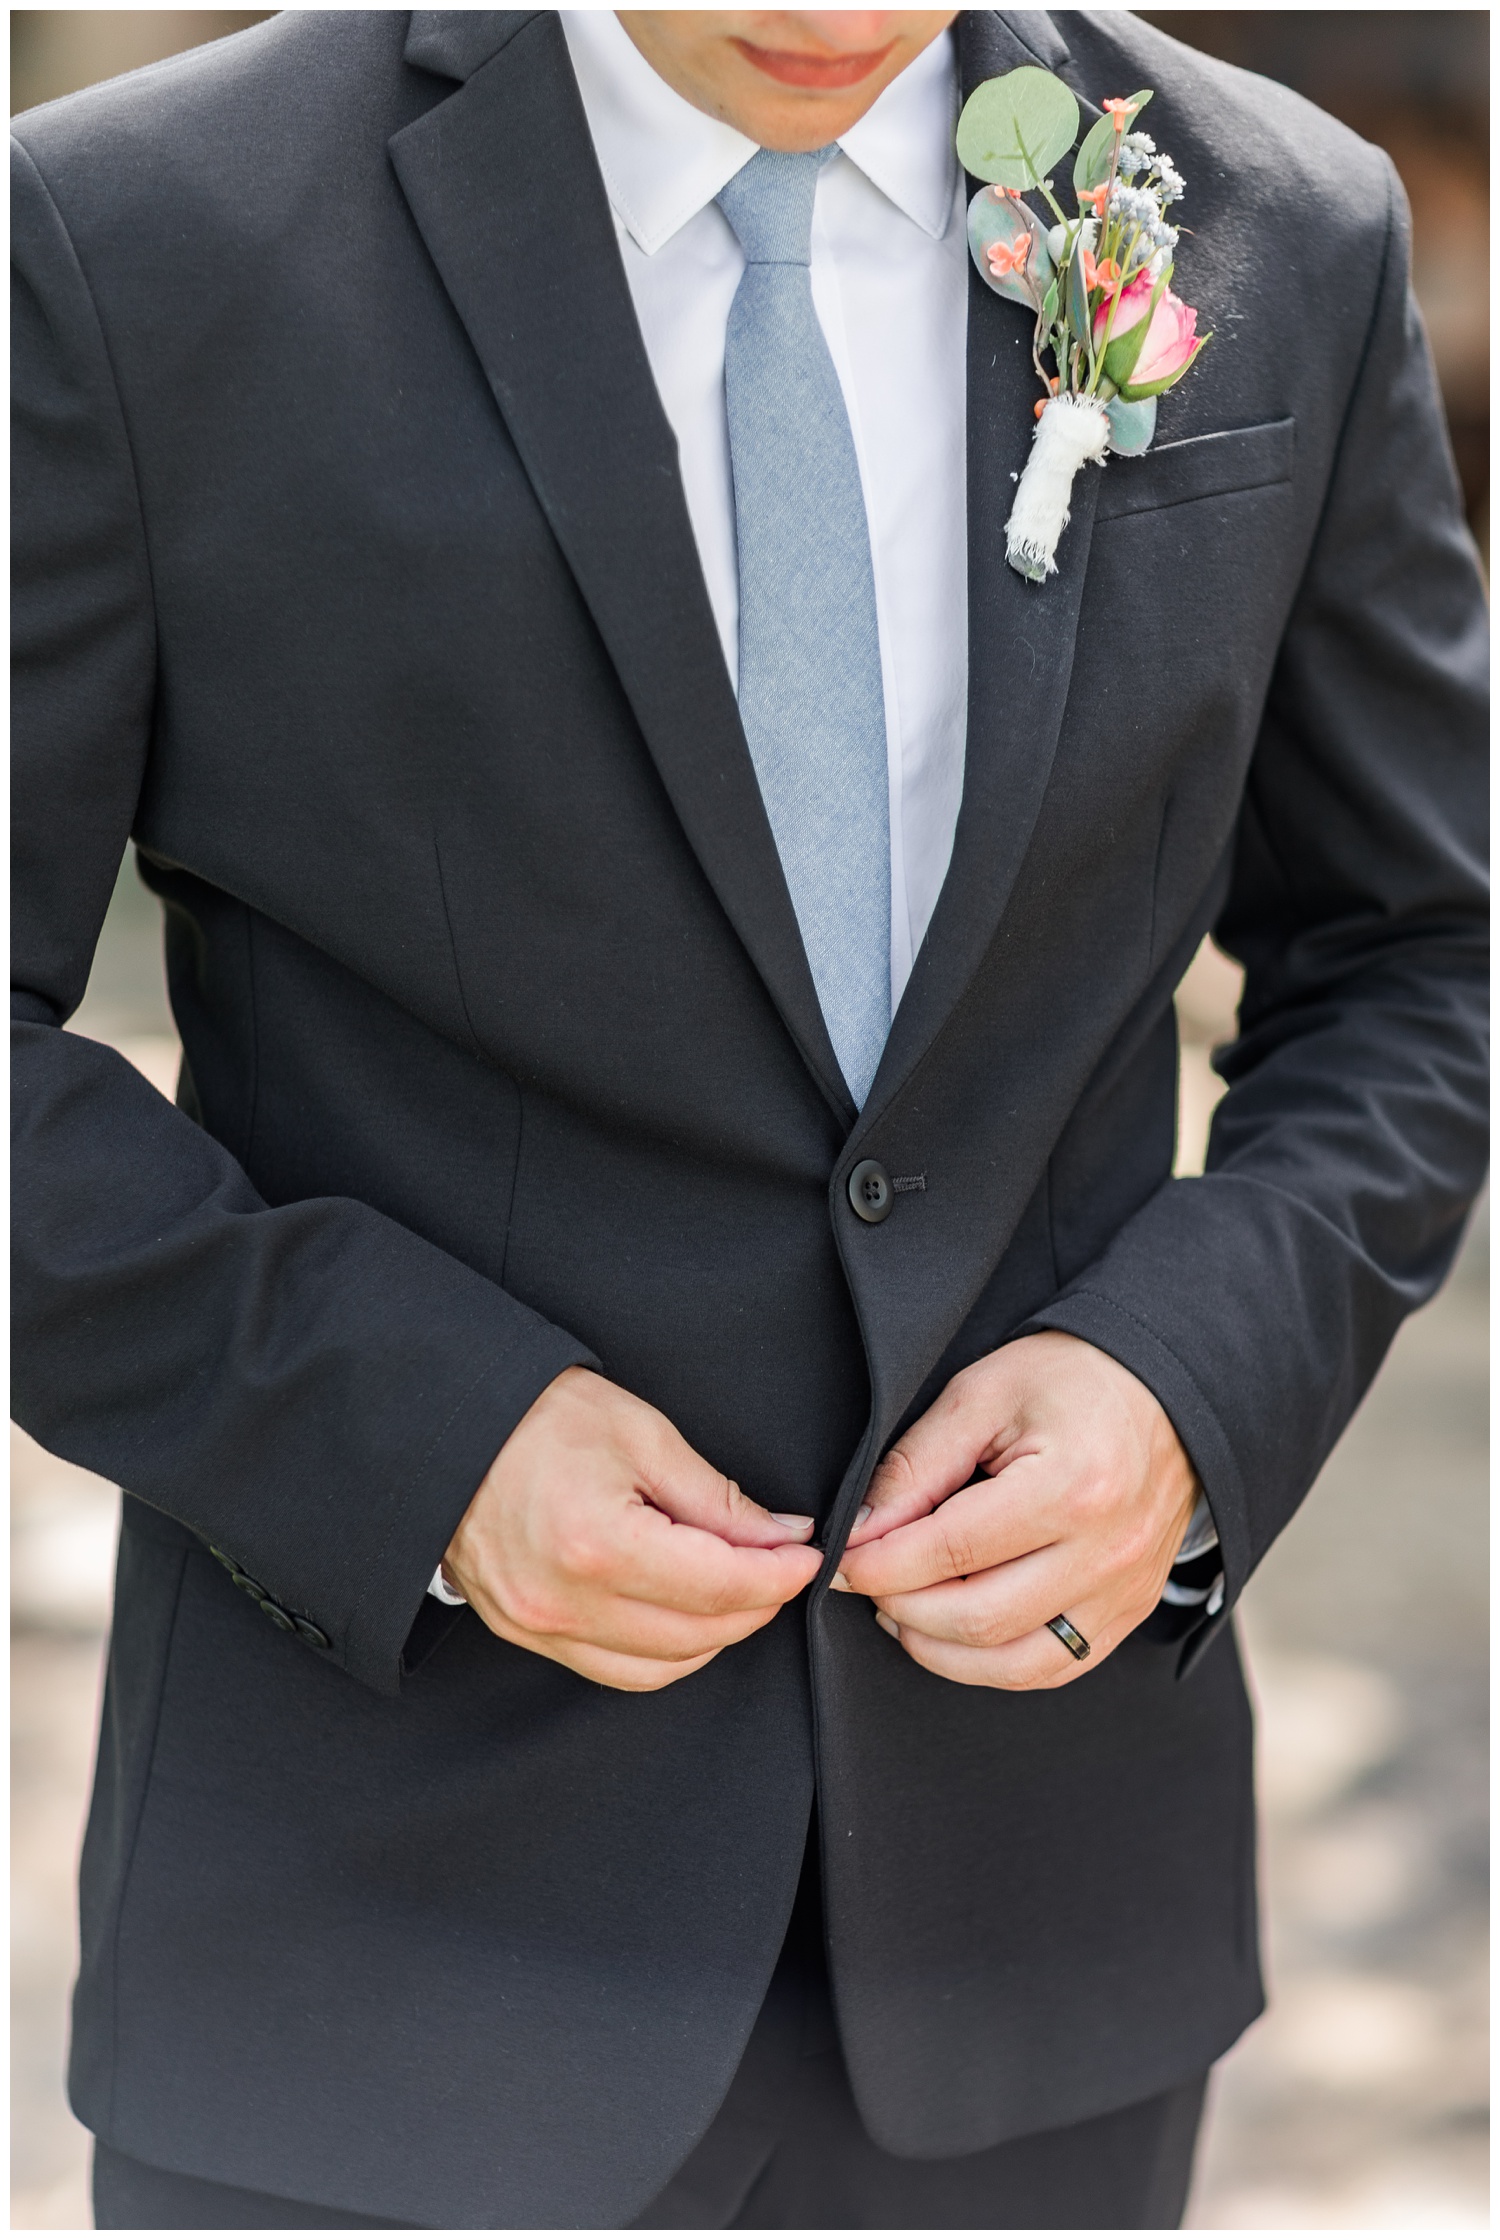 Thad buttons his tux jacket as he waits to meet his bride | CB Studio